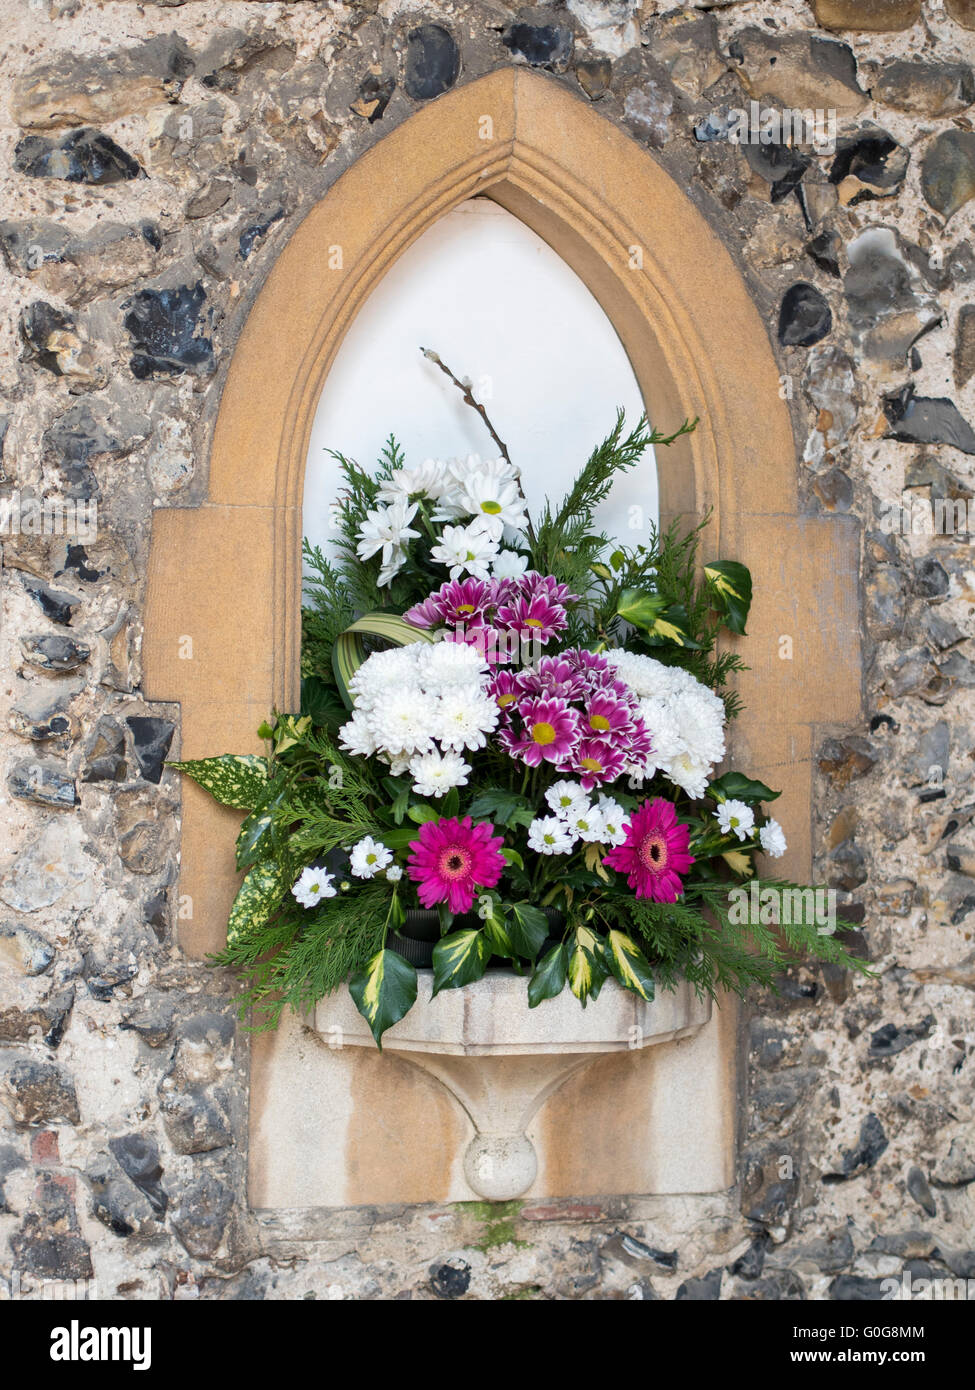 A bouquet of flowers in a church wall. Stock Photo